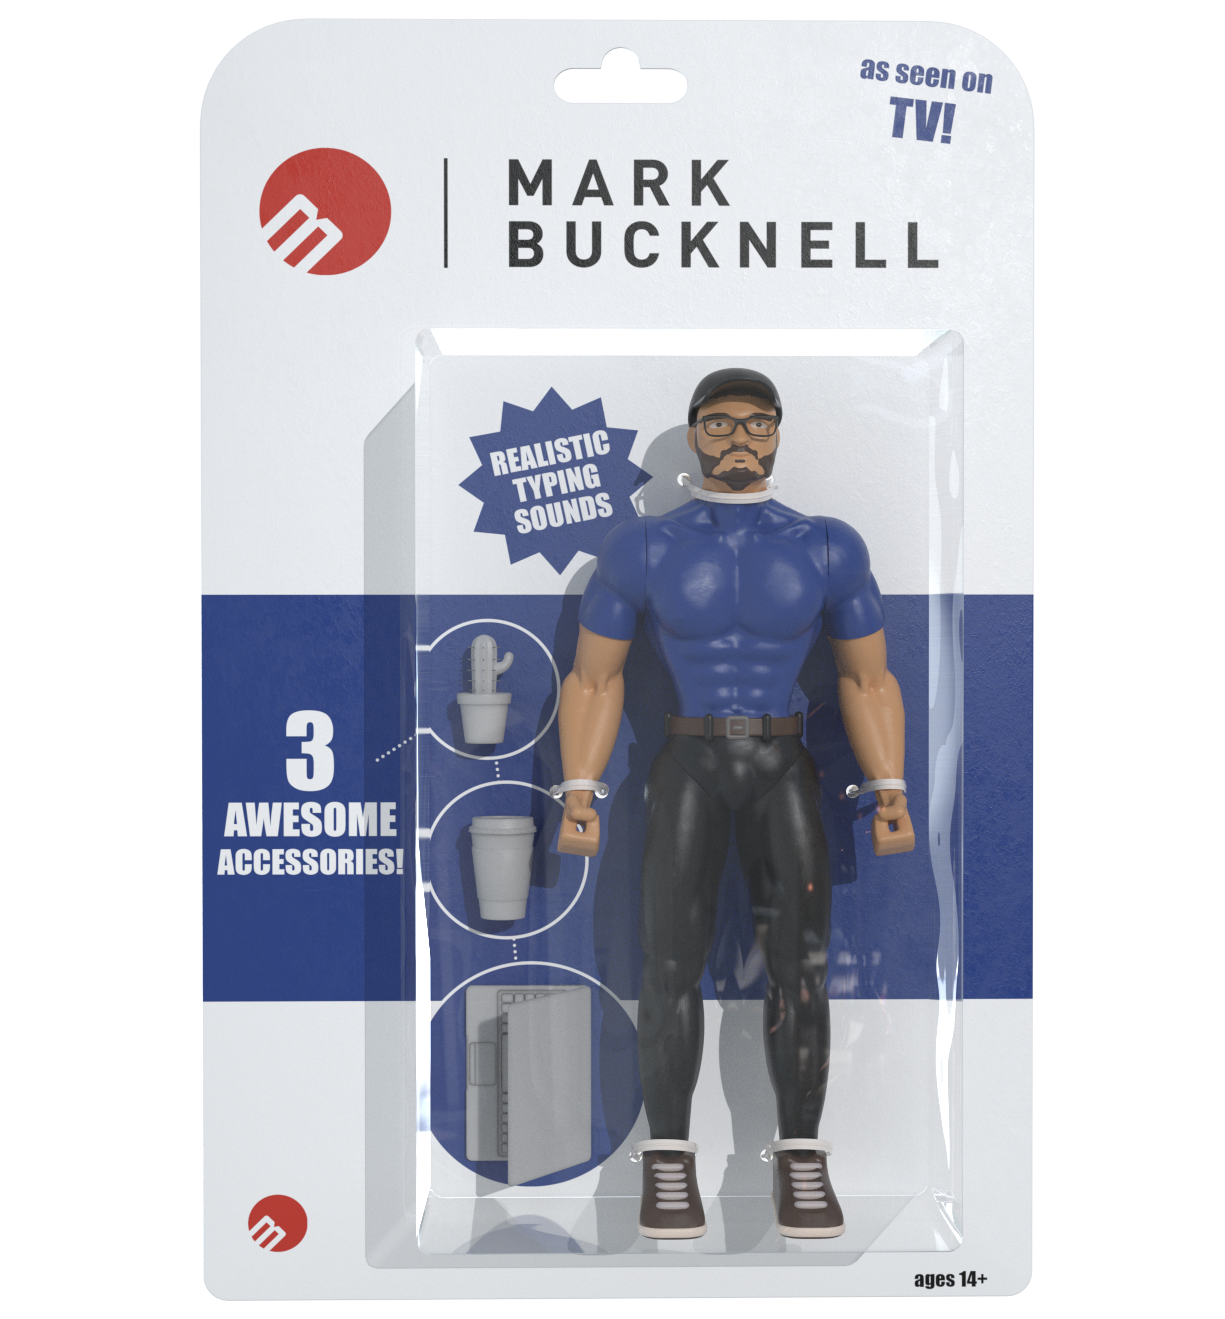 mark bucknell action figure in packaging, it comes with realistic typing sounds and 3 awesome accessories